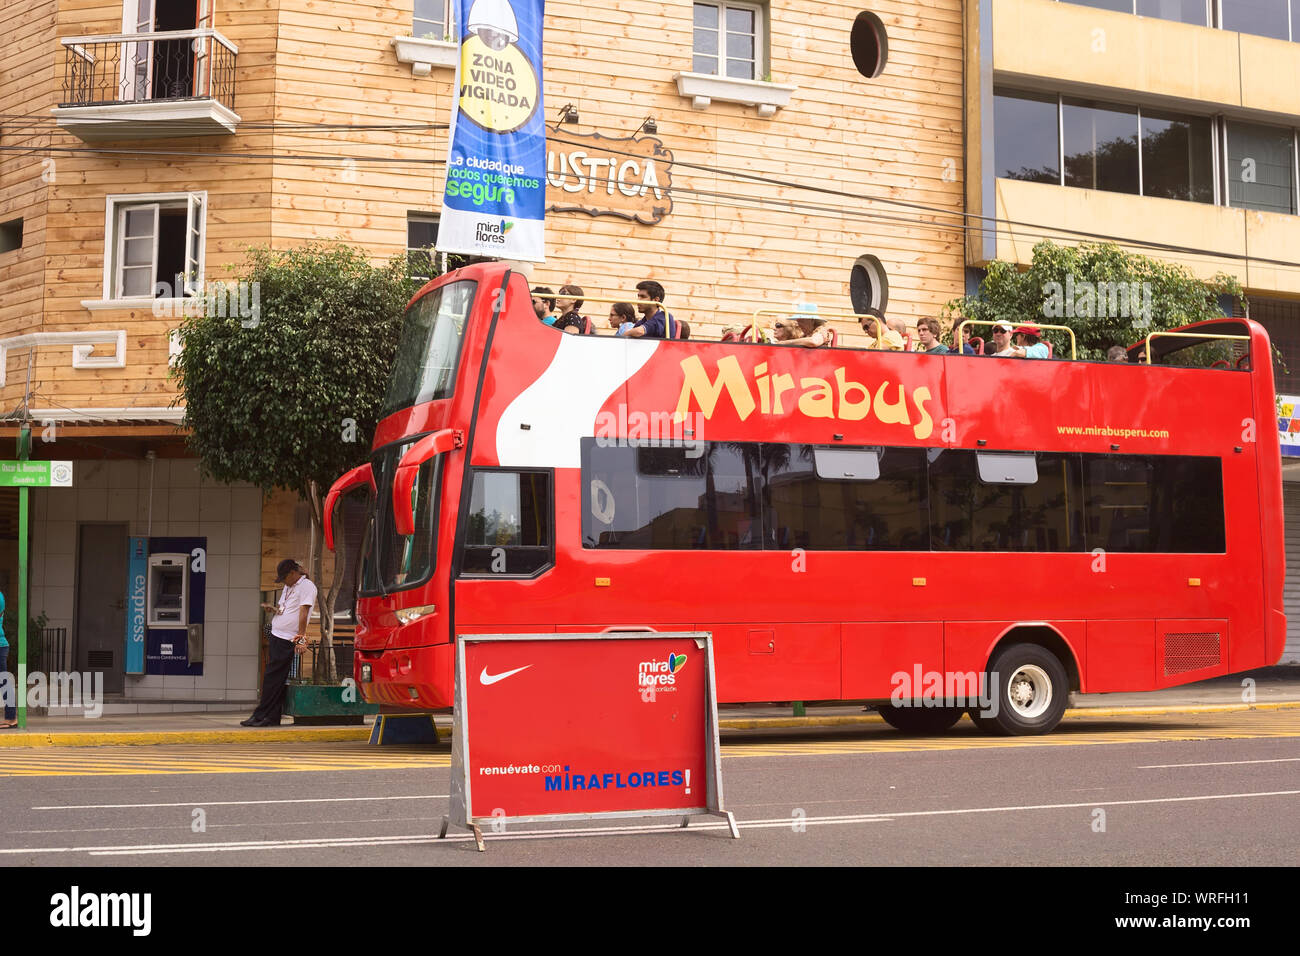 LIMA, PERU - APRIL 1, 2012: Unidentified people on Mirabus sightseeing bus in front of the restaurant Rustica on Av. Diagonal in Miraflores Stock Photo